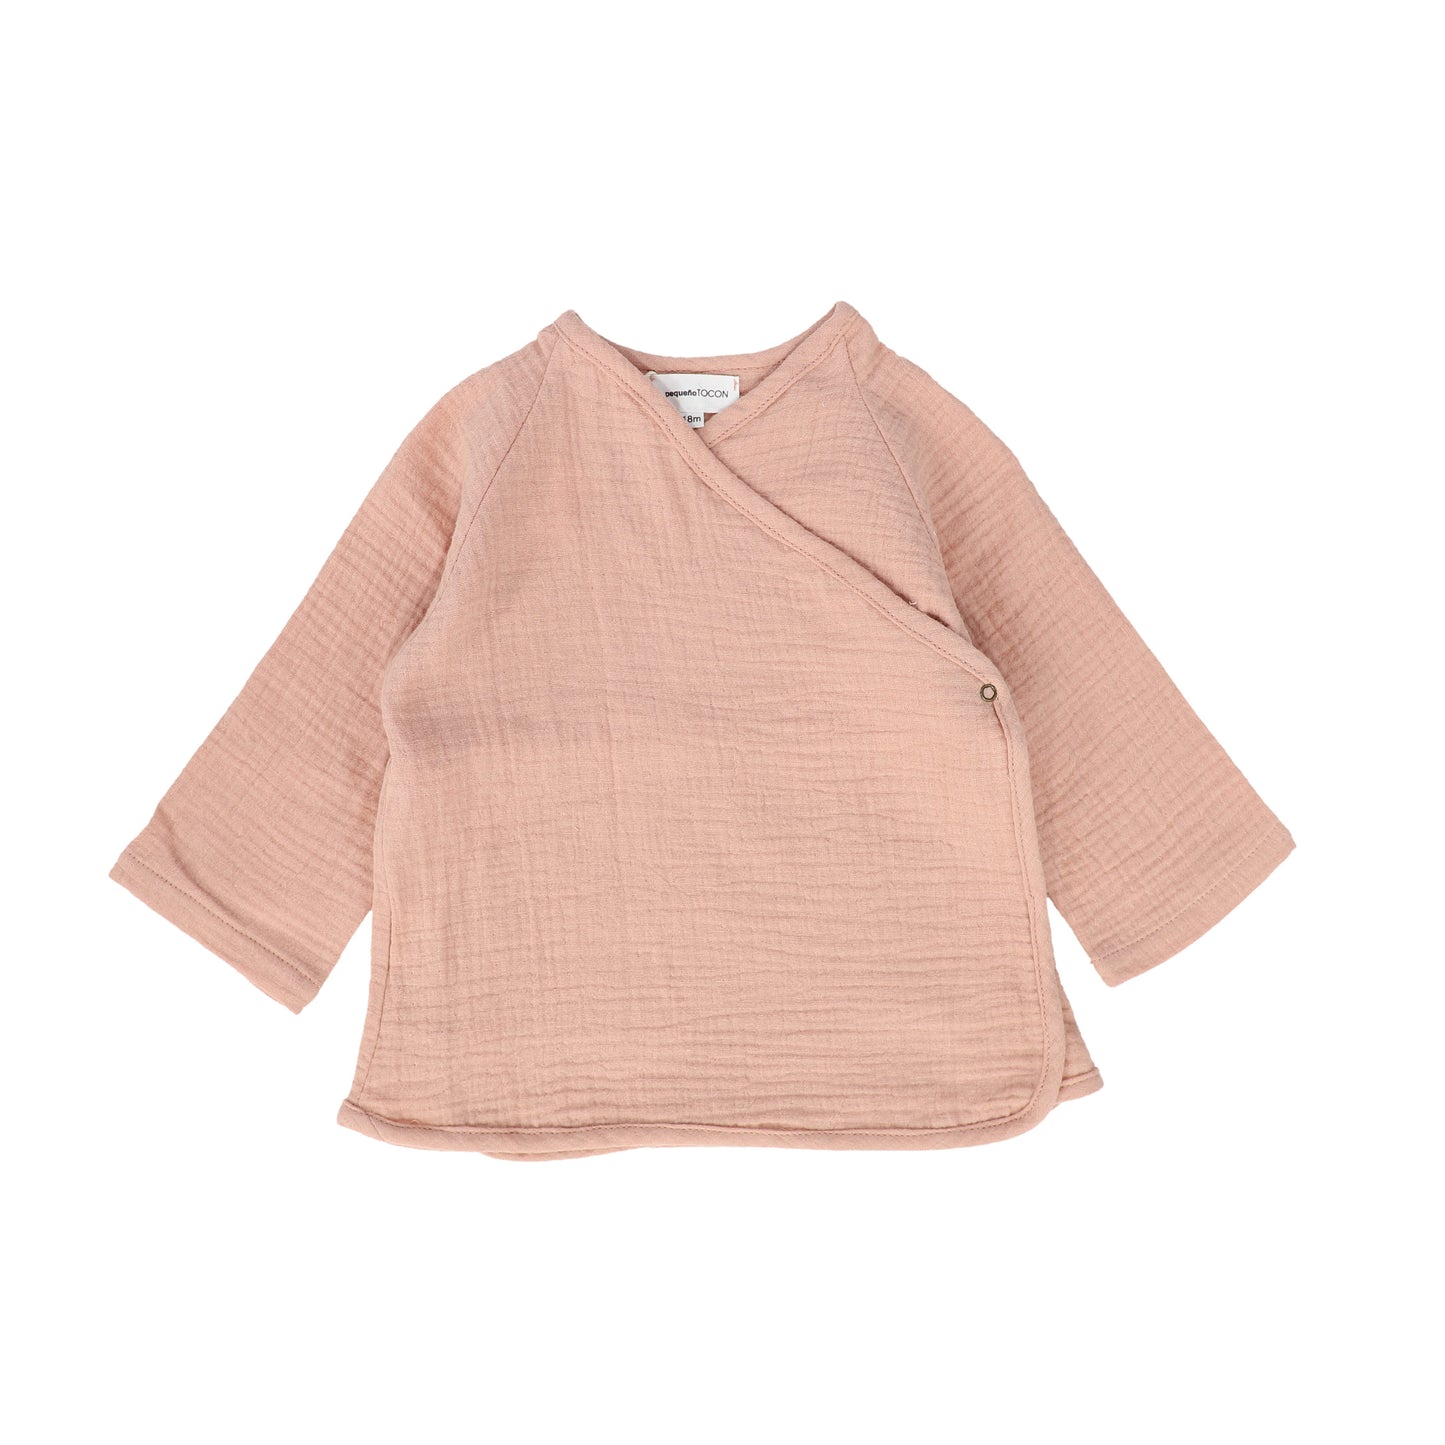 PEQUENO TOCON PINK TEXTURED SIDE SNAP TOP